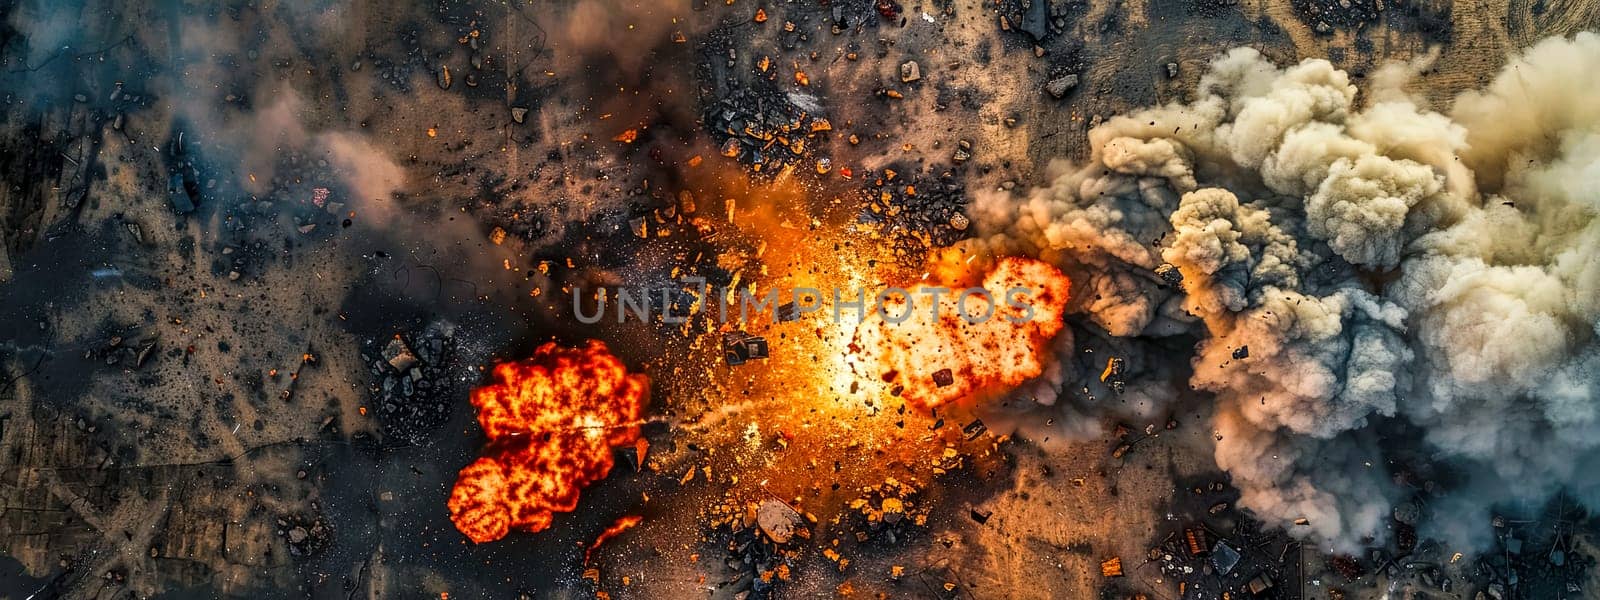 Explosive detonation on ground view from above by Edophoto